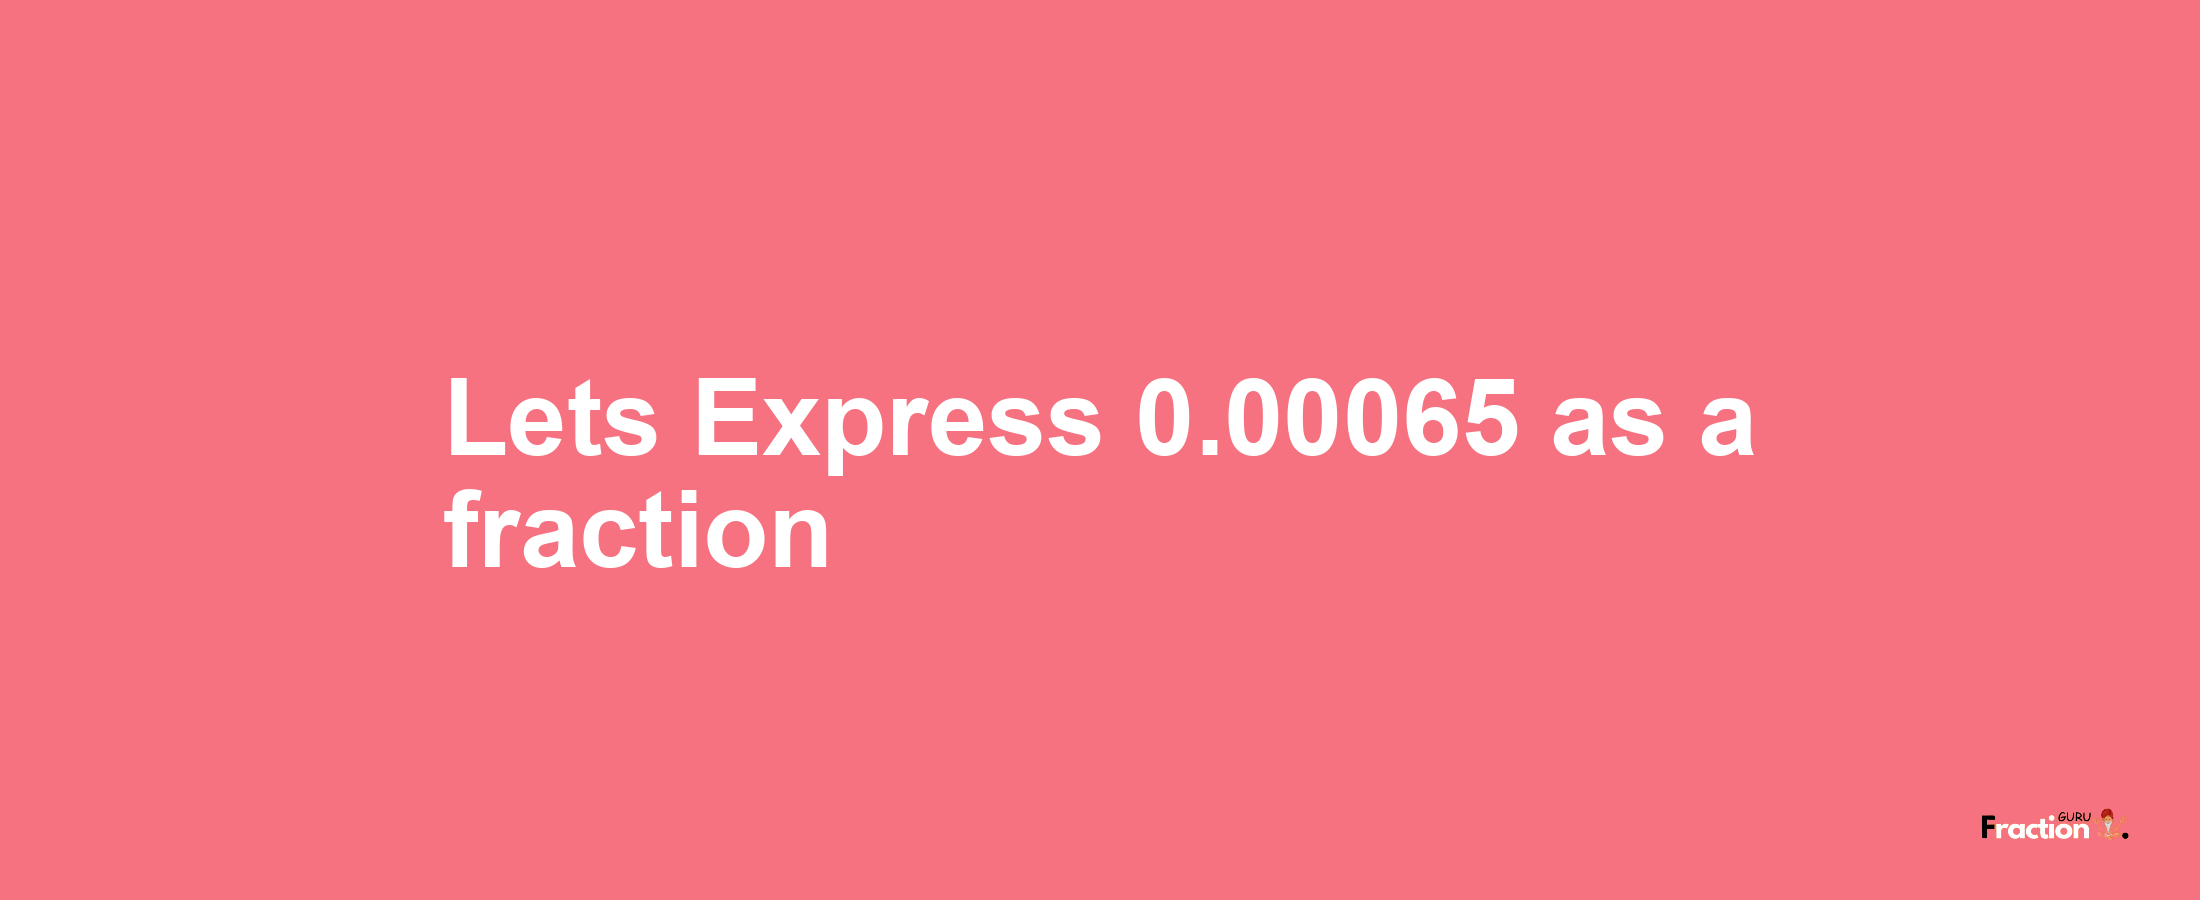 Lets Express 0.00065 as afraction